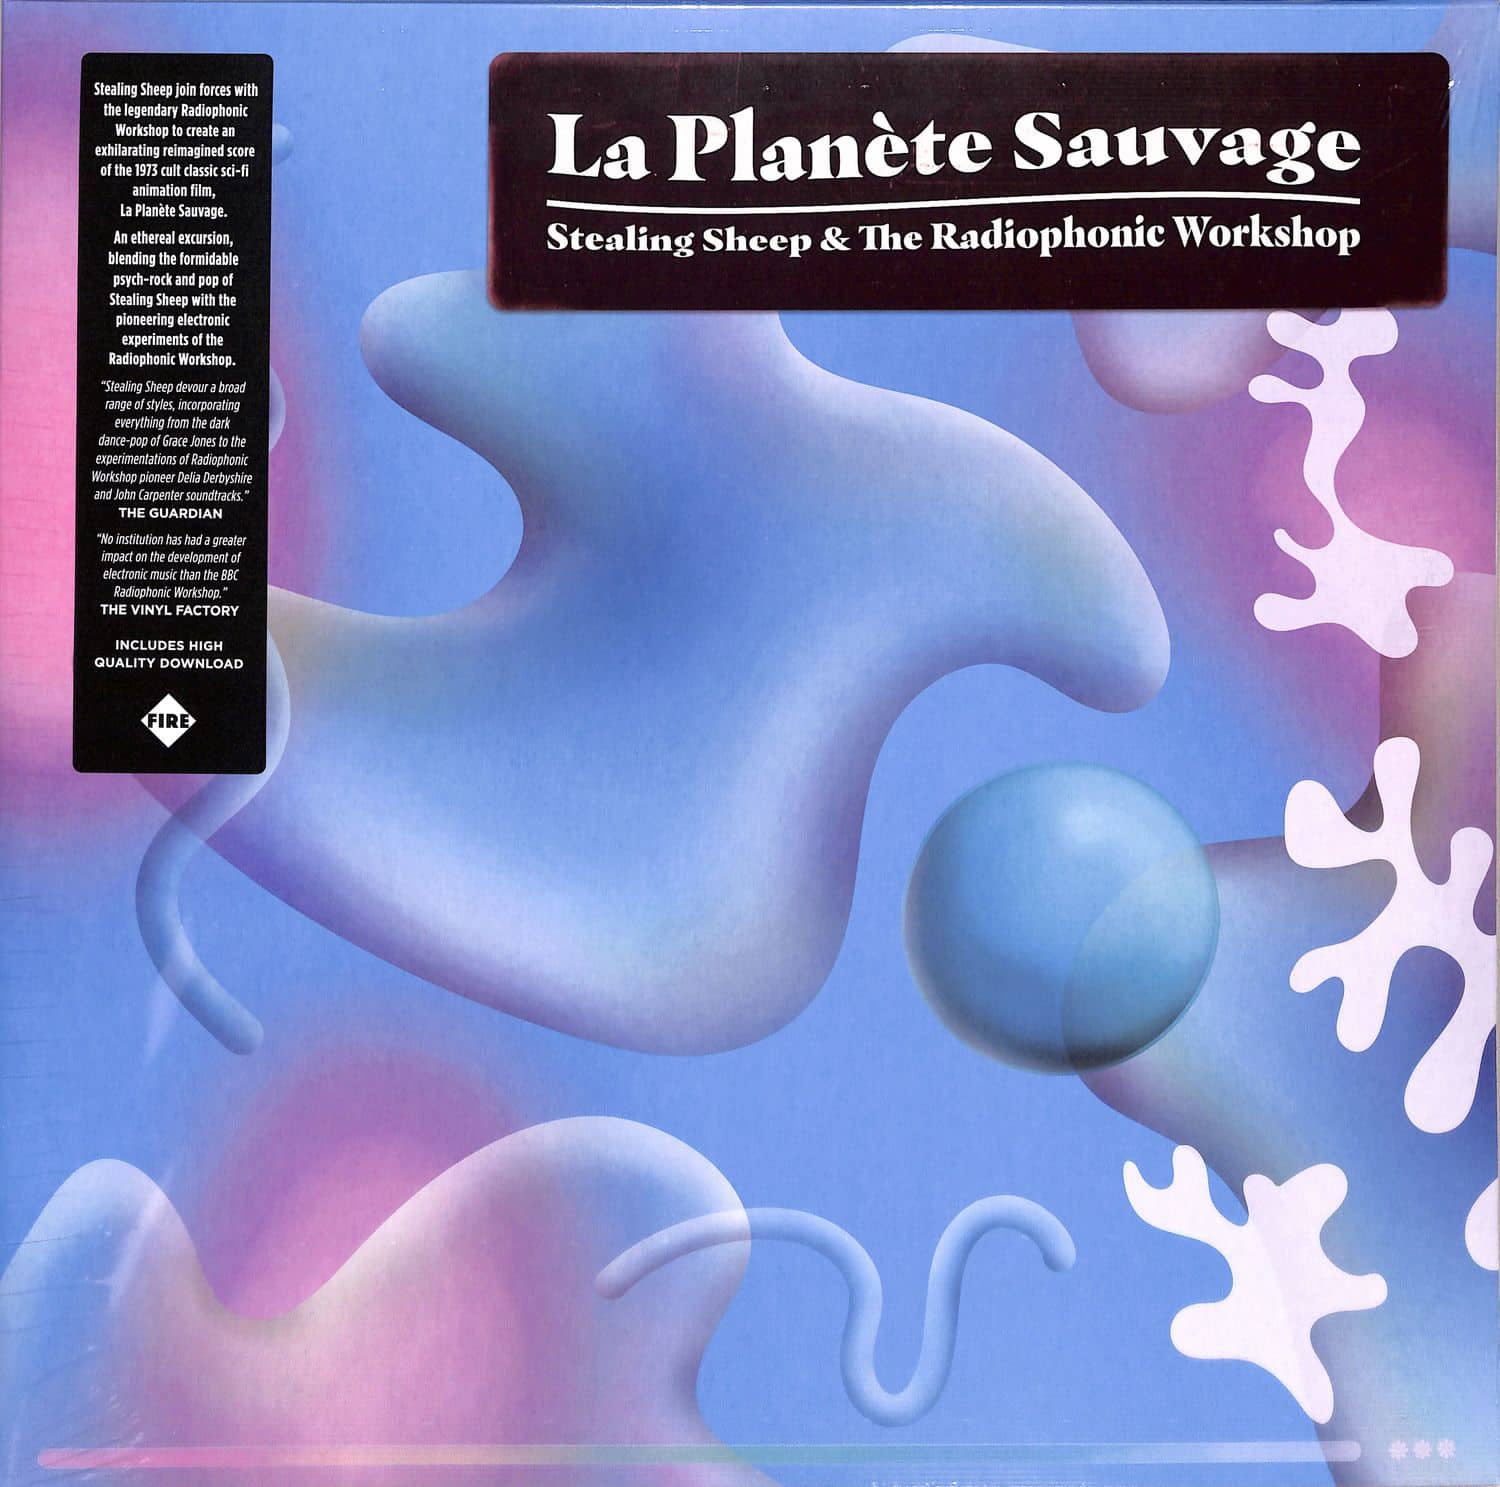 Stealing Sheep And The Radiophonic Workshop - LA PLANETE SAUVAGE 